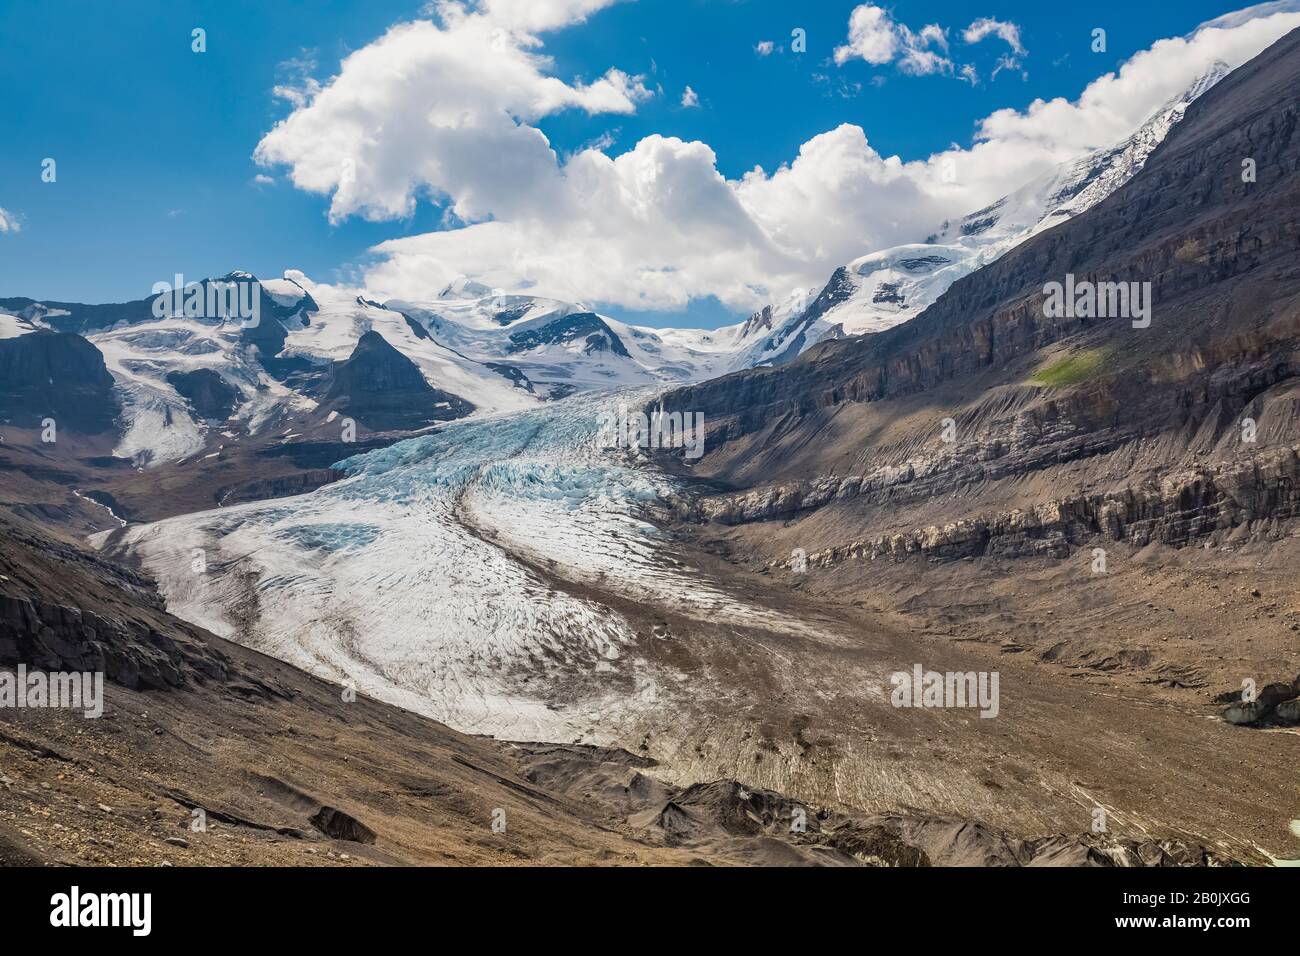 The mighty Robson Glacier flows down from Mount Robson in Mount Robson Provincial Park, British Columbia, Canada Stock Photo